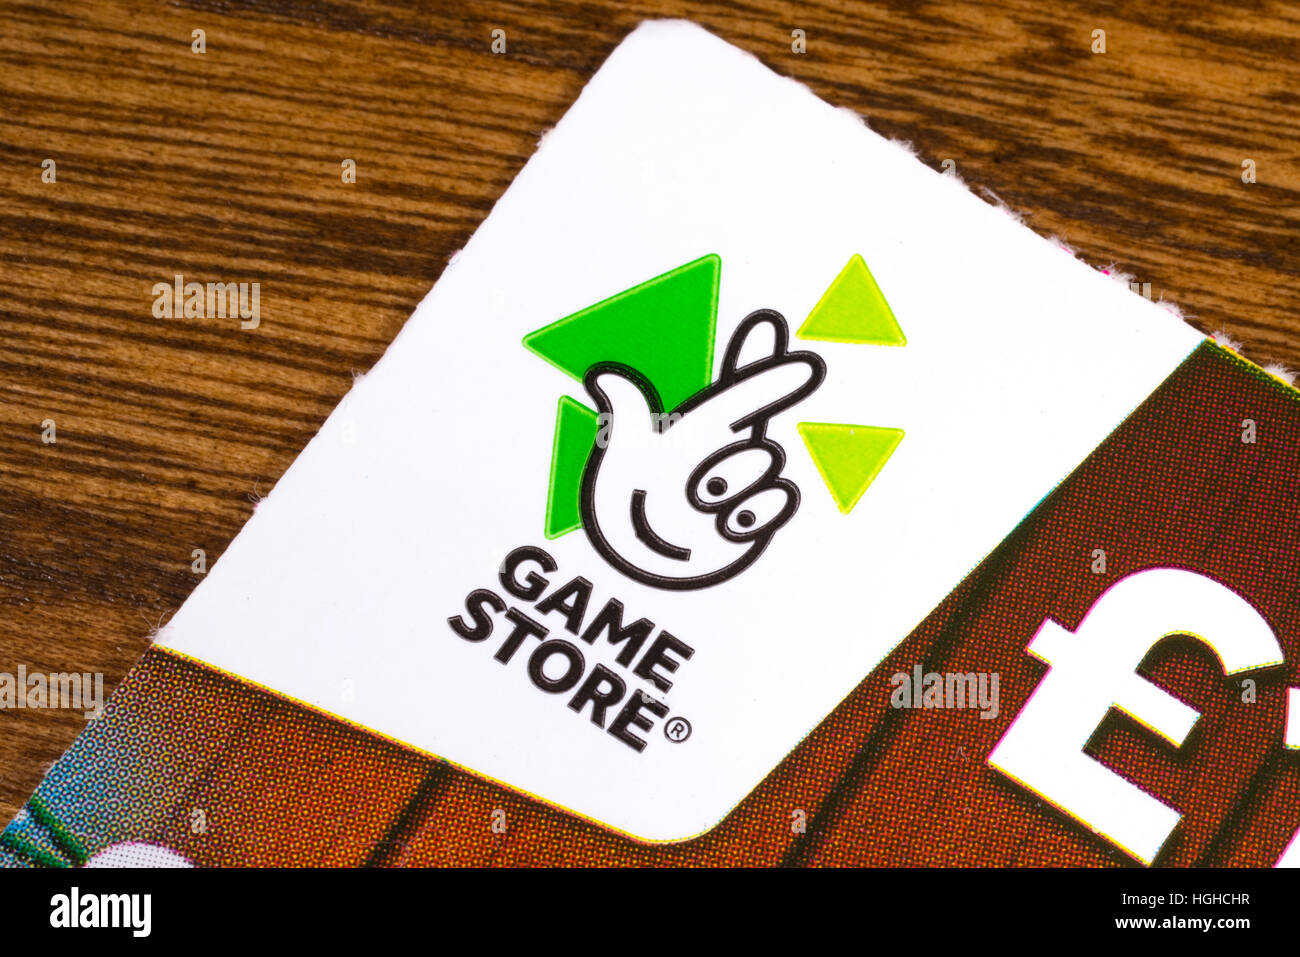 LONDON, UK - JANUARY 4TH 2017: The Game Store logo on the corner of a scratchcard, part of the National Lottery brand by Camelot Stock Photo